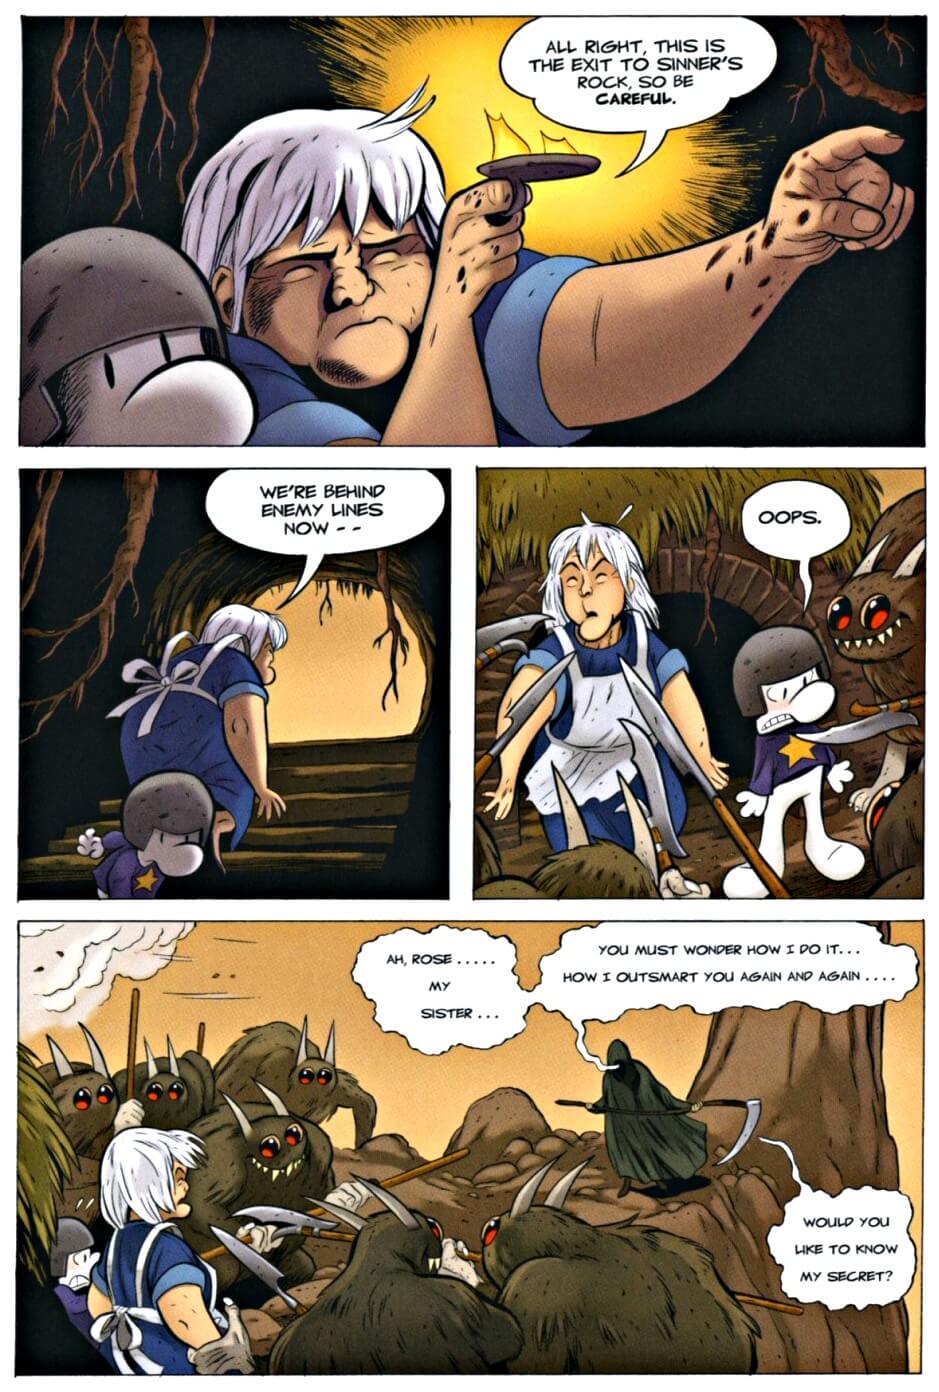 page 129 chapter 5 of bone 9 crown of horns graphic novel